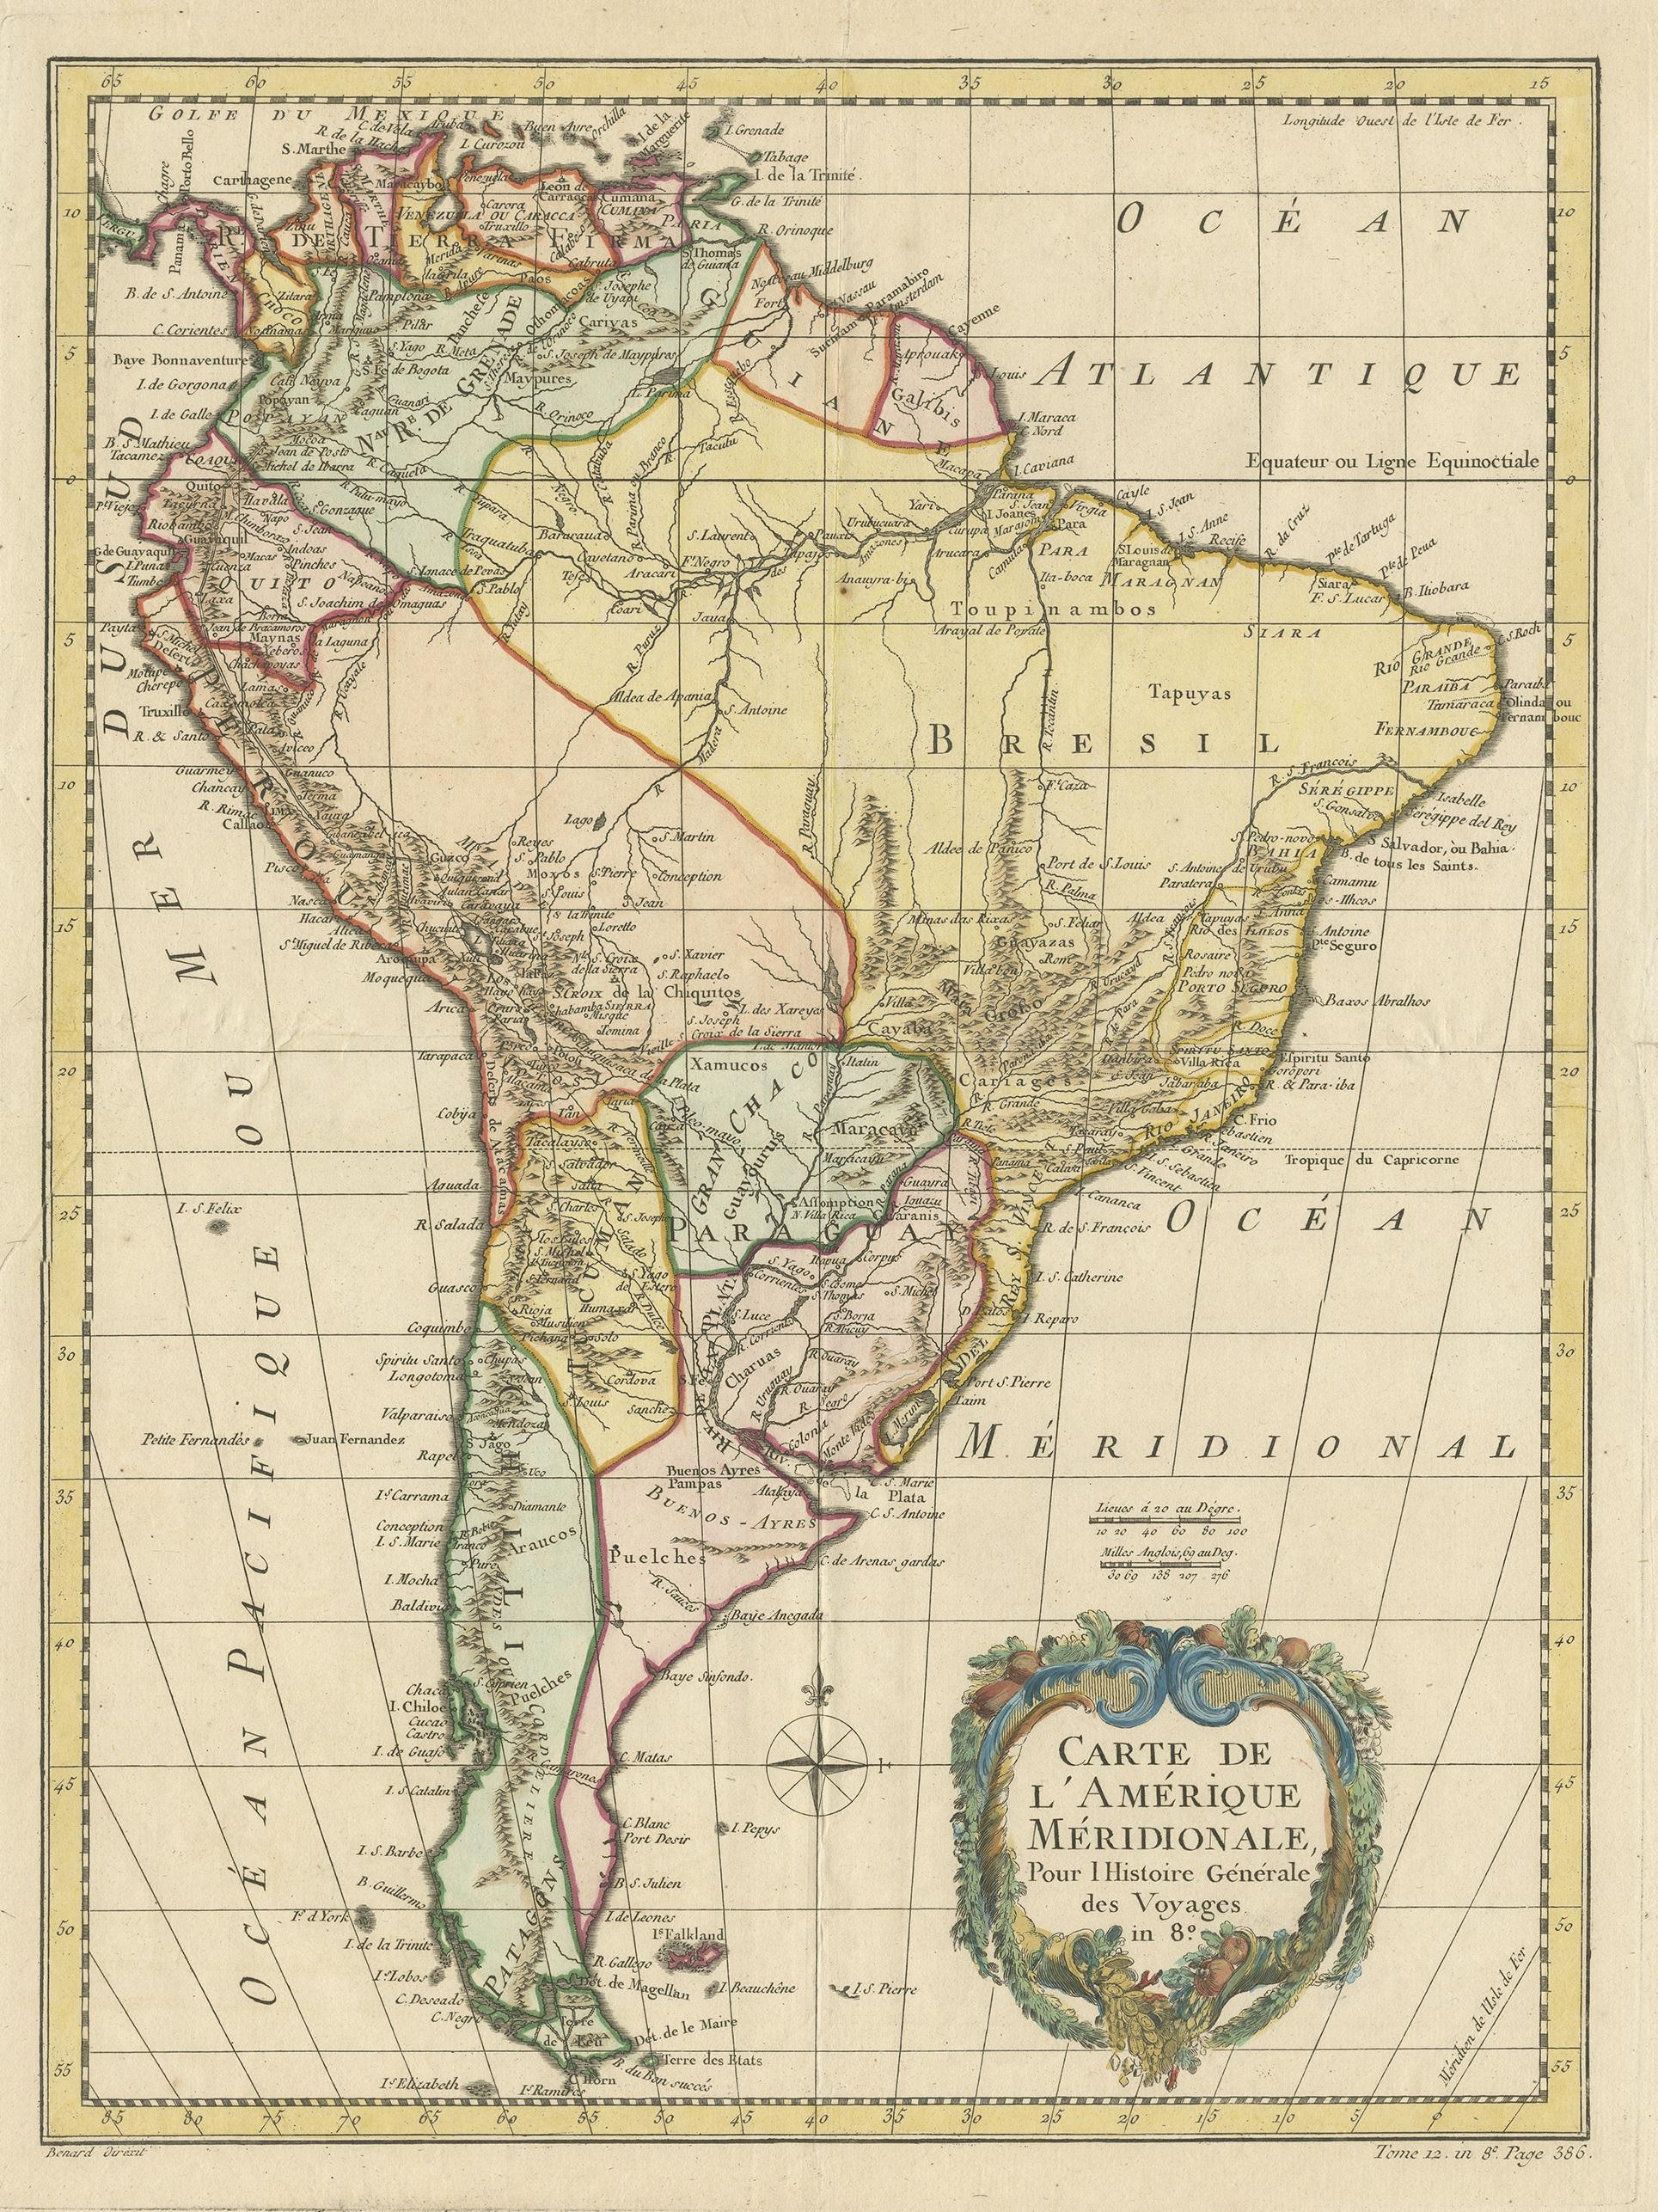 Antique map titled 'Carte de l'Amerique Méridionale'. Original antique map of South America. Note the 'Laguna de Xarayes' is illustrated as the source of the Paraguay river. The laguna is now known as Pantanal, world's largest tropical wetland area.